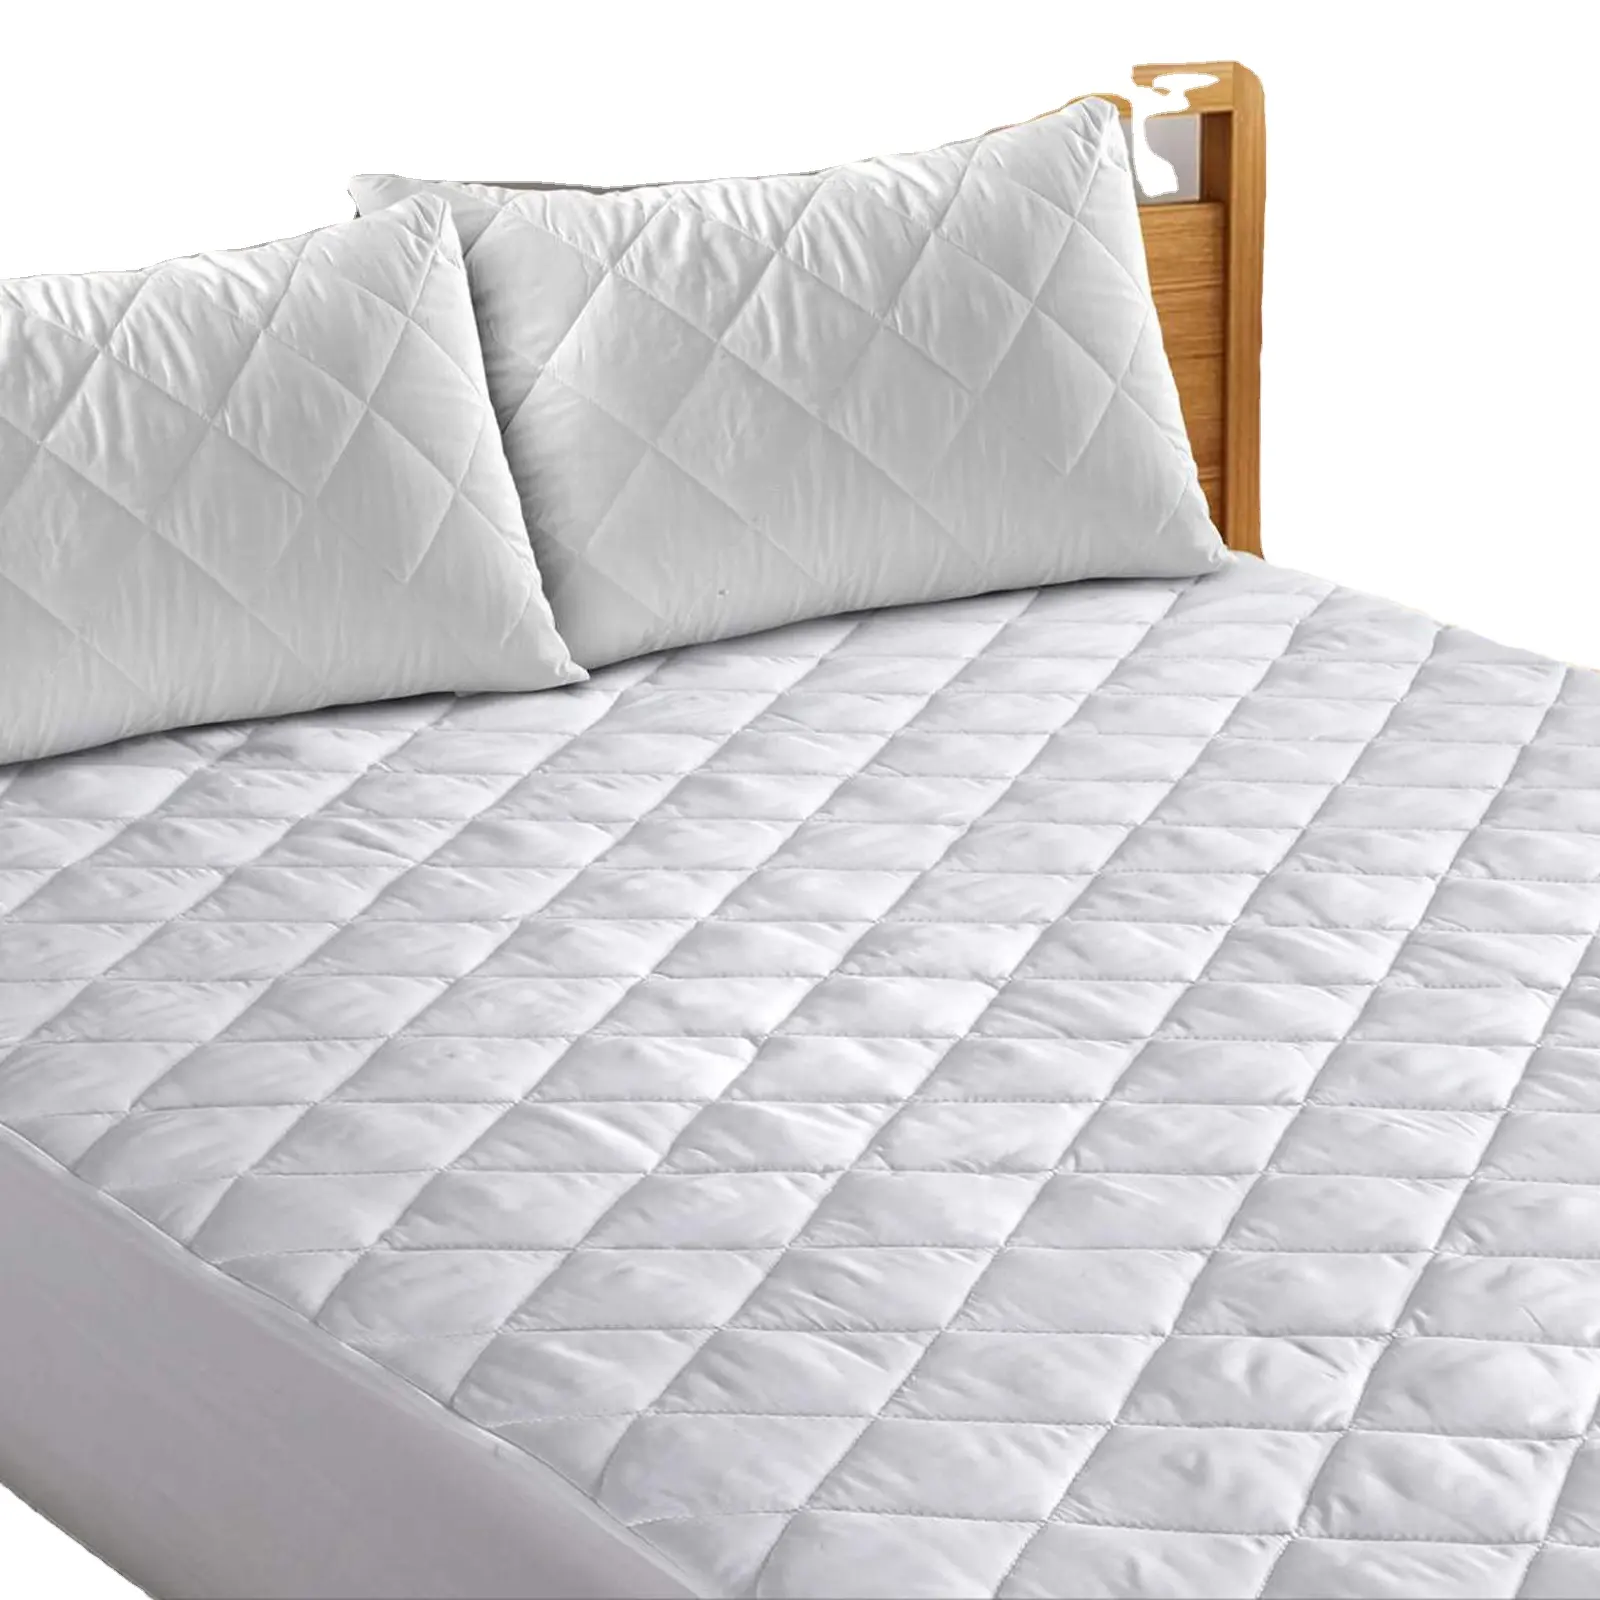 Customized 100% waterproof breathable fully fitted bed cover extra deep quilted waterproof mattress protector